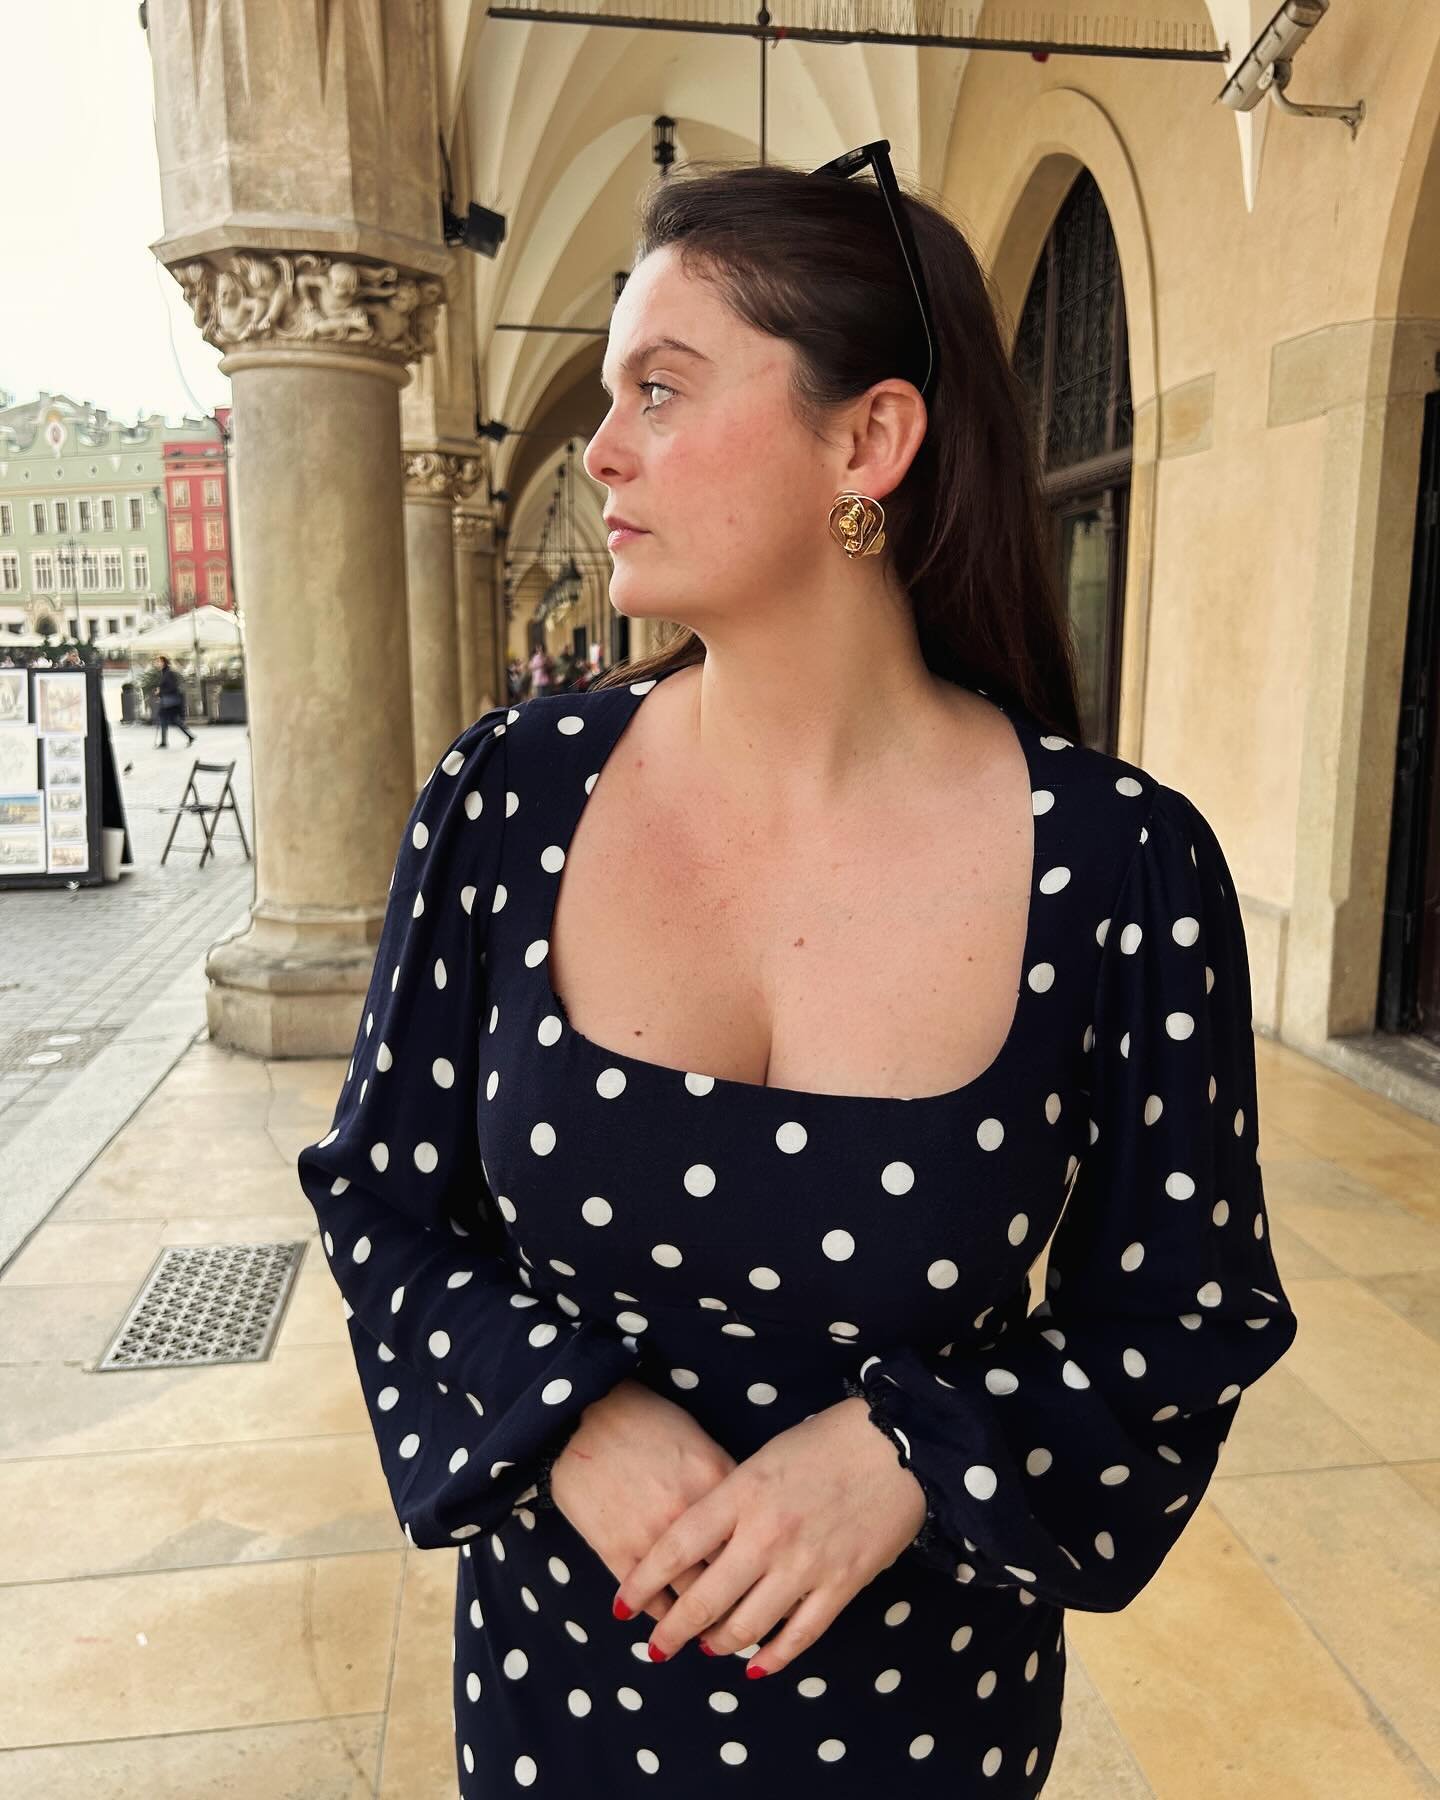 Arm candy? We&rsquo;re all about body candy. Delilah is made using a soft viscose navy &amp; white polka and designed with a feminine square neckline and bias cut skirt. 

She is 1 of 30. Available at Franksldn.co.uk. 

#slowfashion #summerstyle #sum